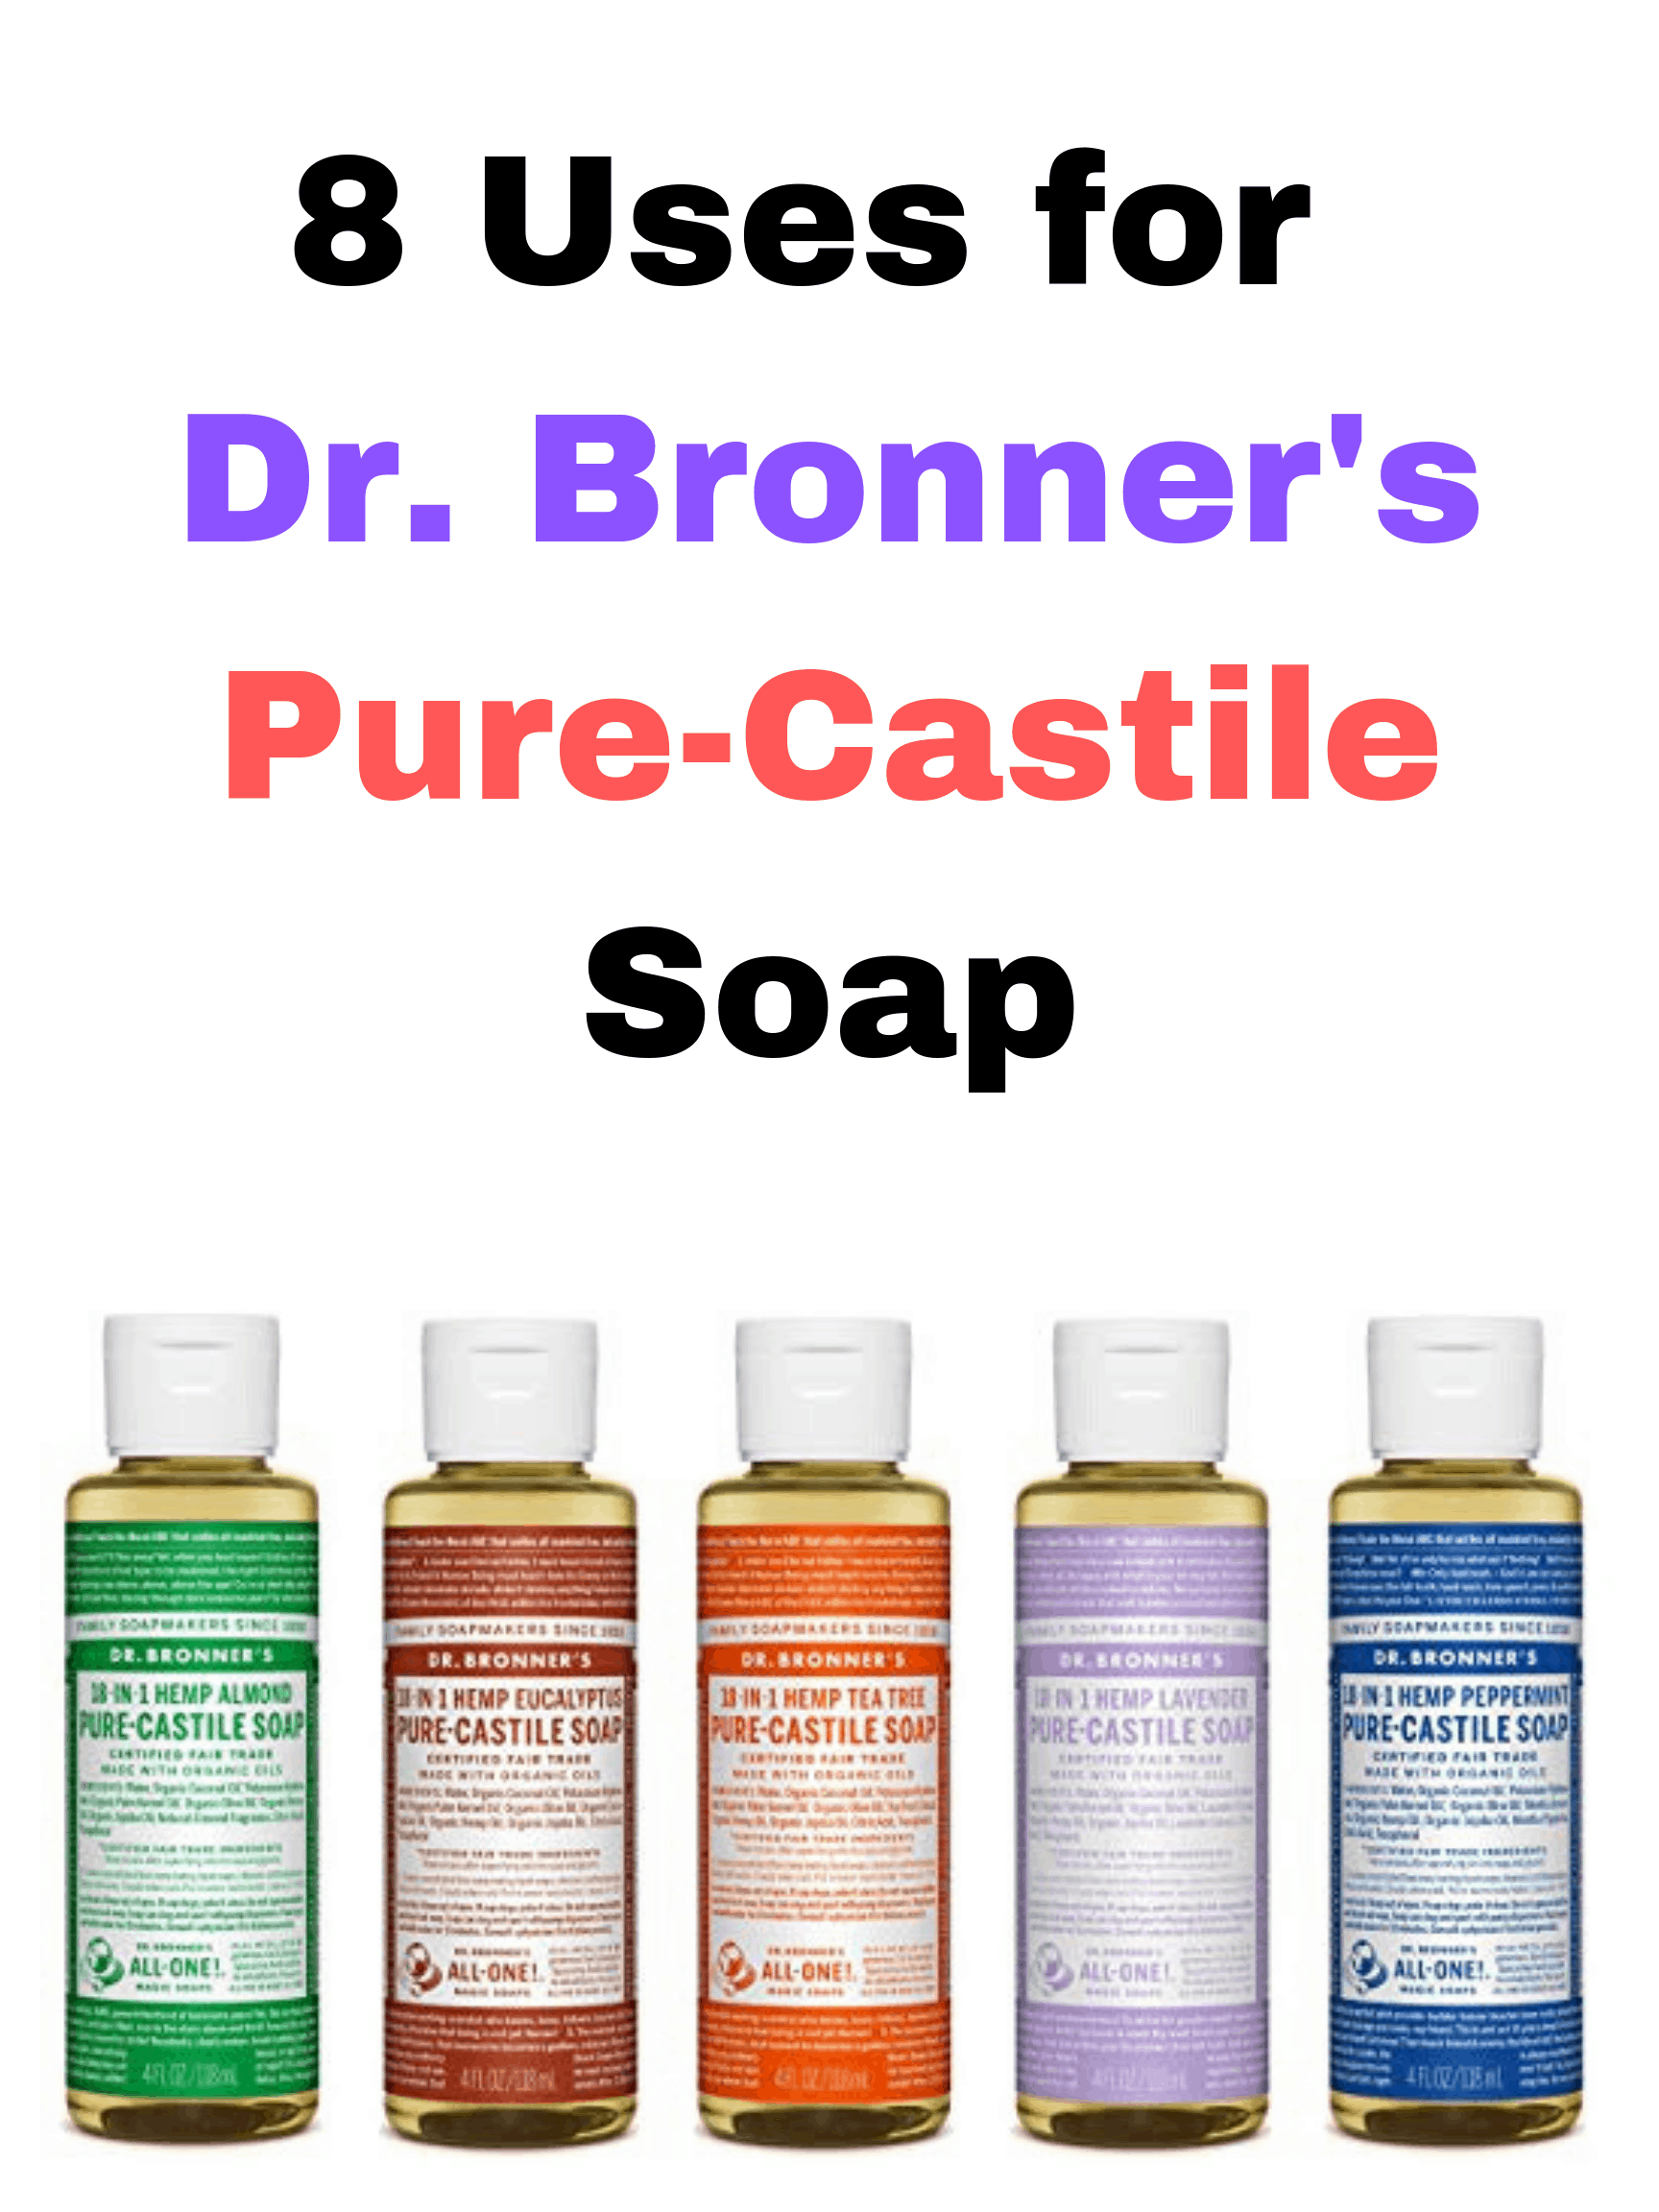 https://homemadeforelle.com/wp-content/uploads/2019/06/8-Uses-for-Dr.-Bronners-Pure-Castile-Soap.png